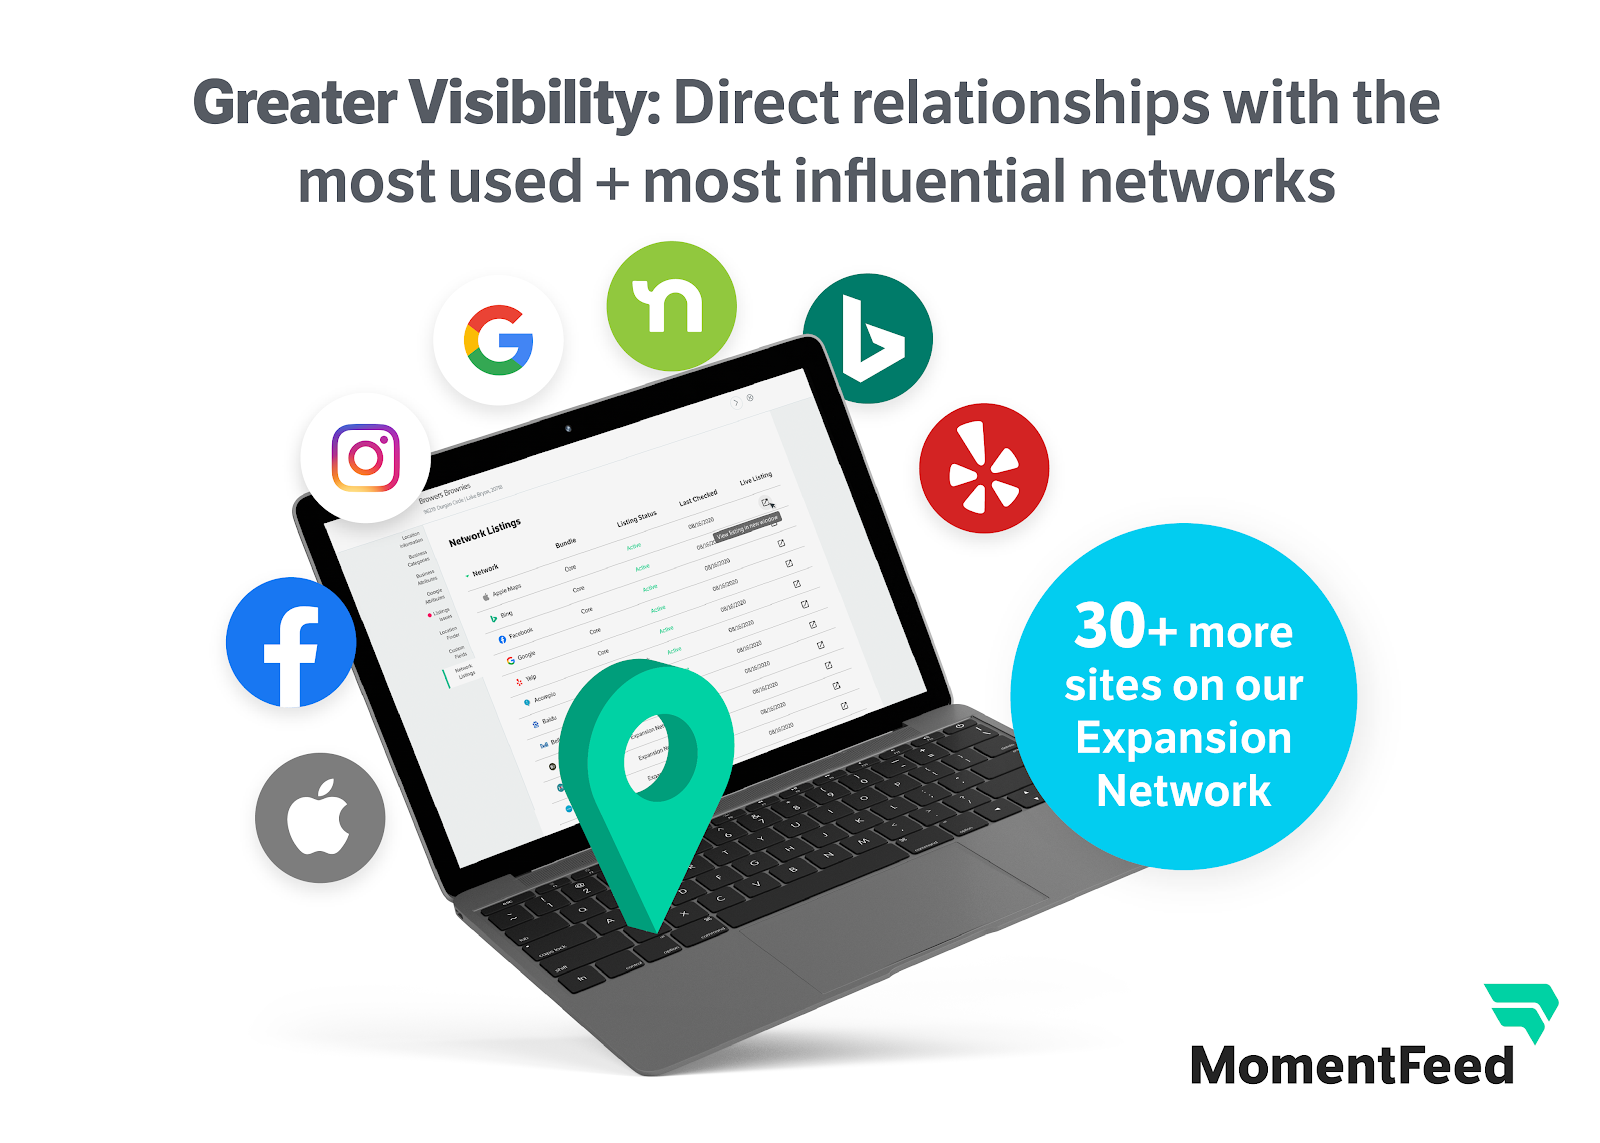 MomentFeed’s new network of expanded listings offers direct, real-time connections to the best, most authoritative, most visited directories available.